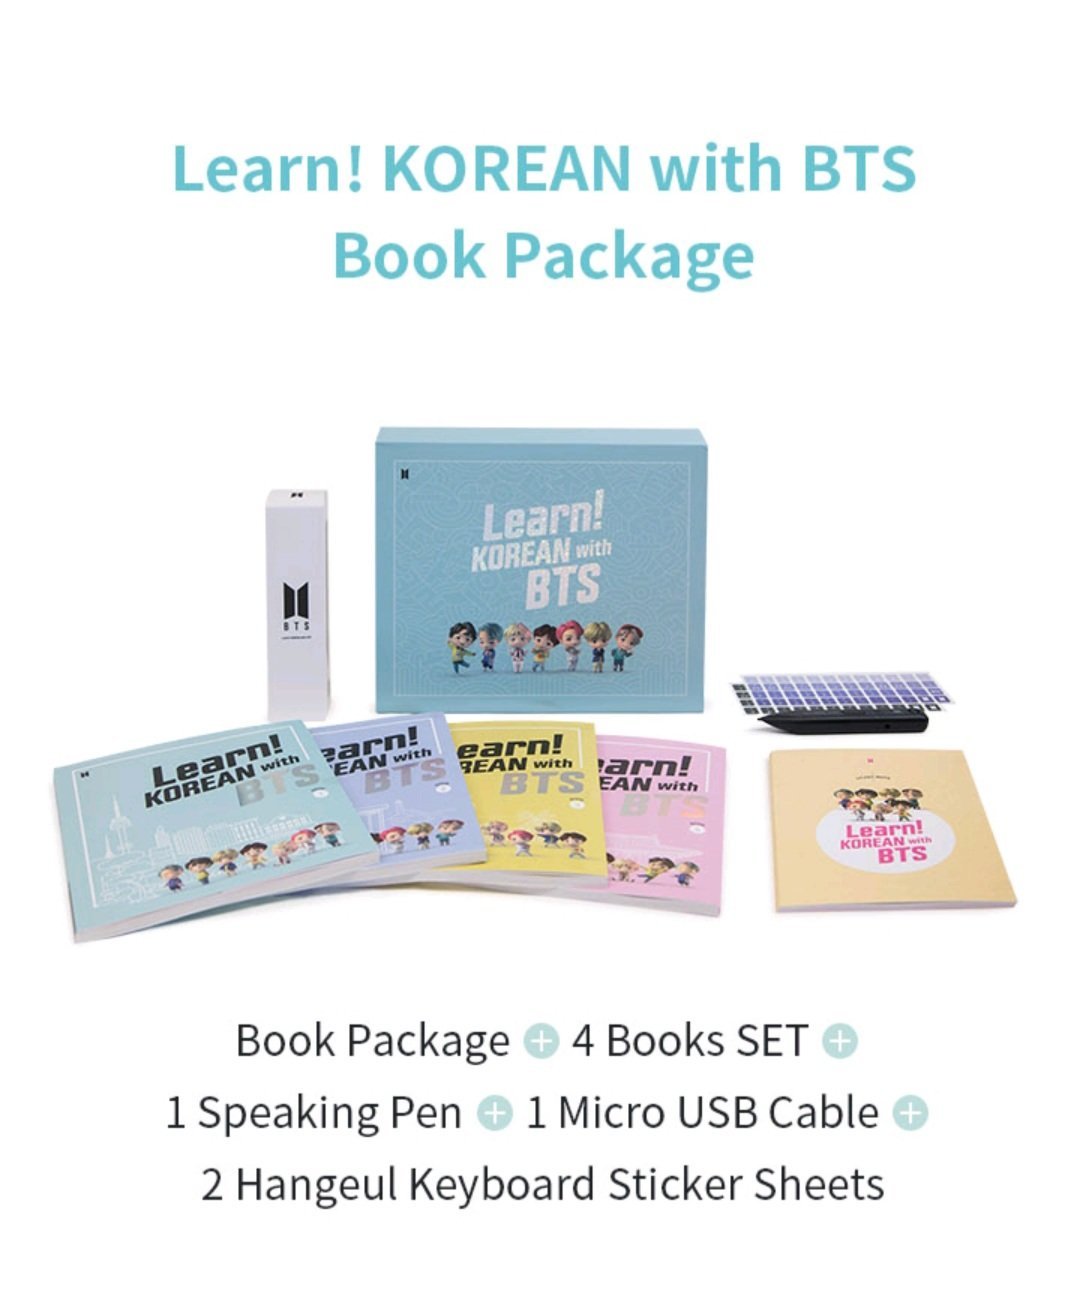 BTS - LEARN KOREAN WITH BTS BOOK PACKAGE